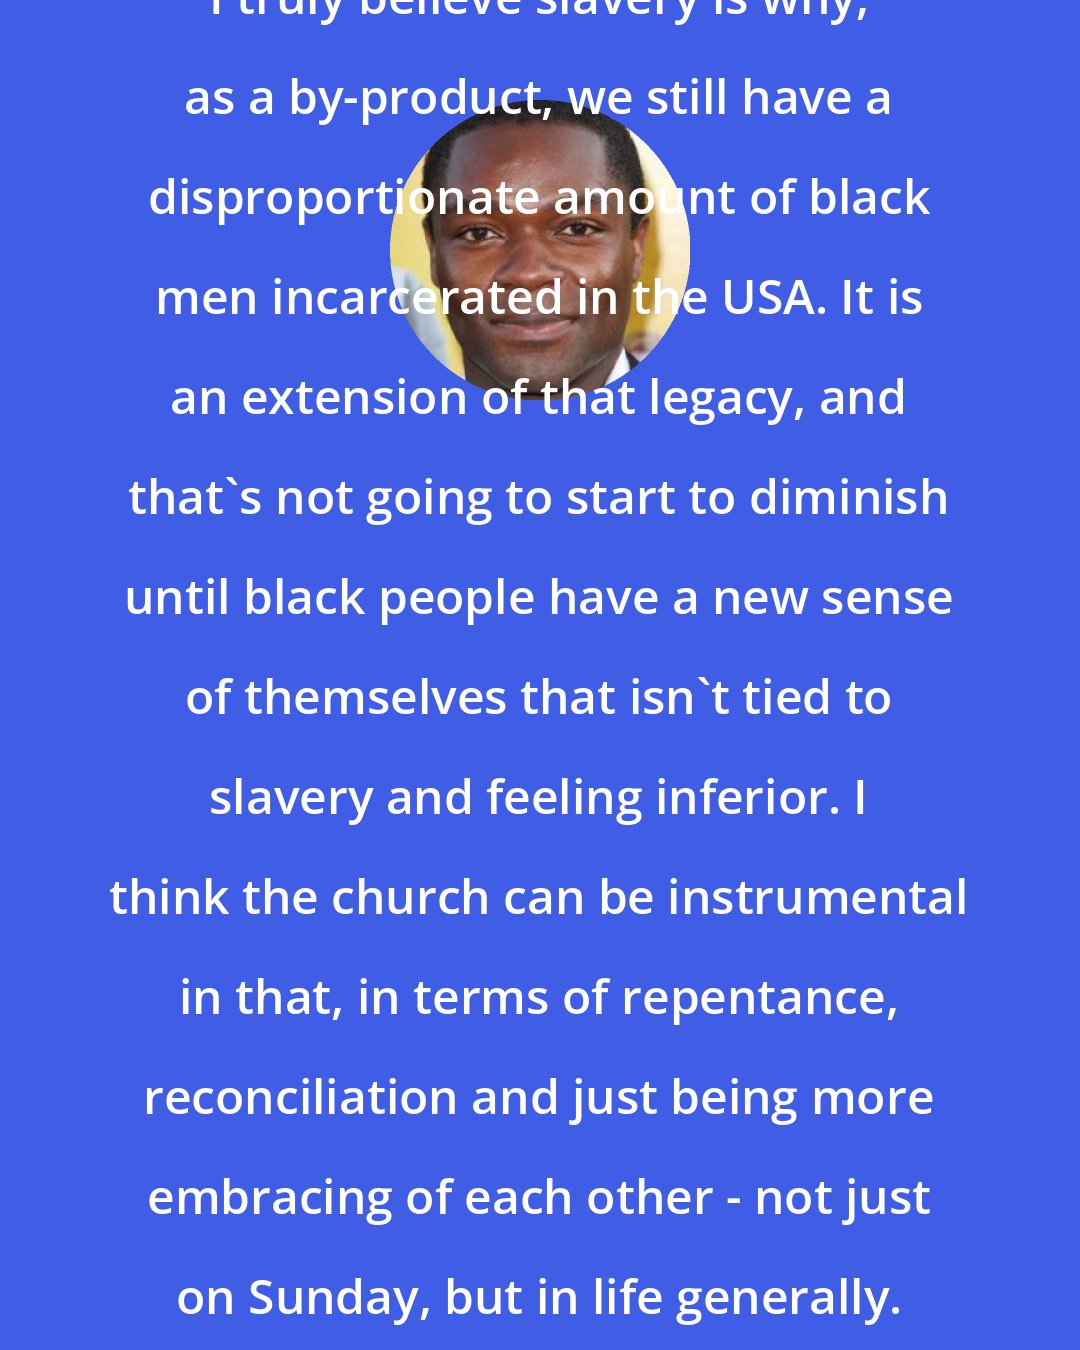 David Oyelowo: I truly believe slavery is why, as a by-product, we still have a disproportionate amount of black men incarcerated in the USA. It is an extension of that legacy, and that's not going to start to diminish until black people have a new sense of themselves that isn't tied to slavery and feeling inferior. I think the church can be instrumental in that, in terms of repentance, reconciliation and just being more embracing of each other - not just on Sunday, but in life generally.